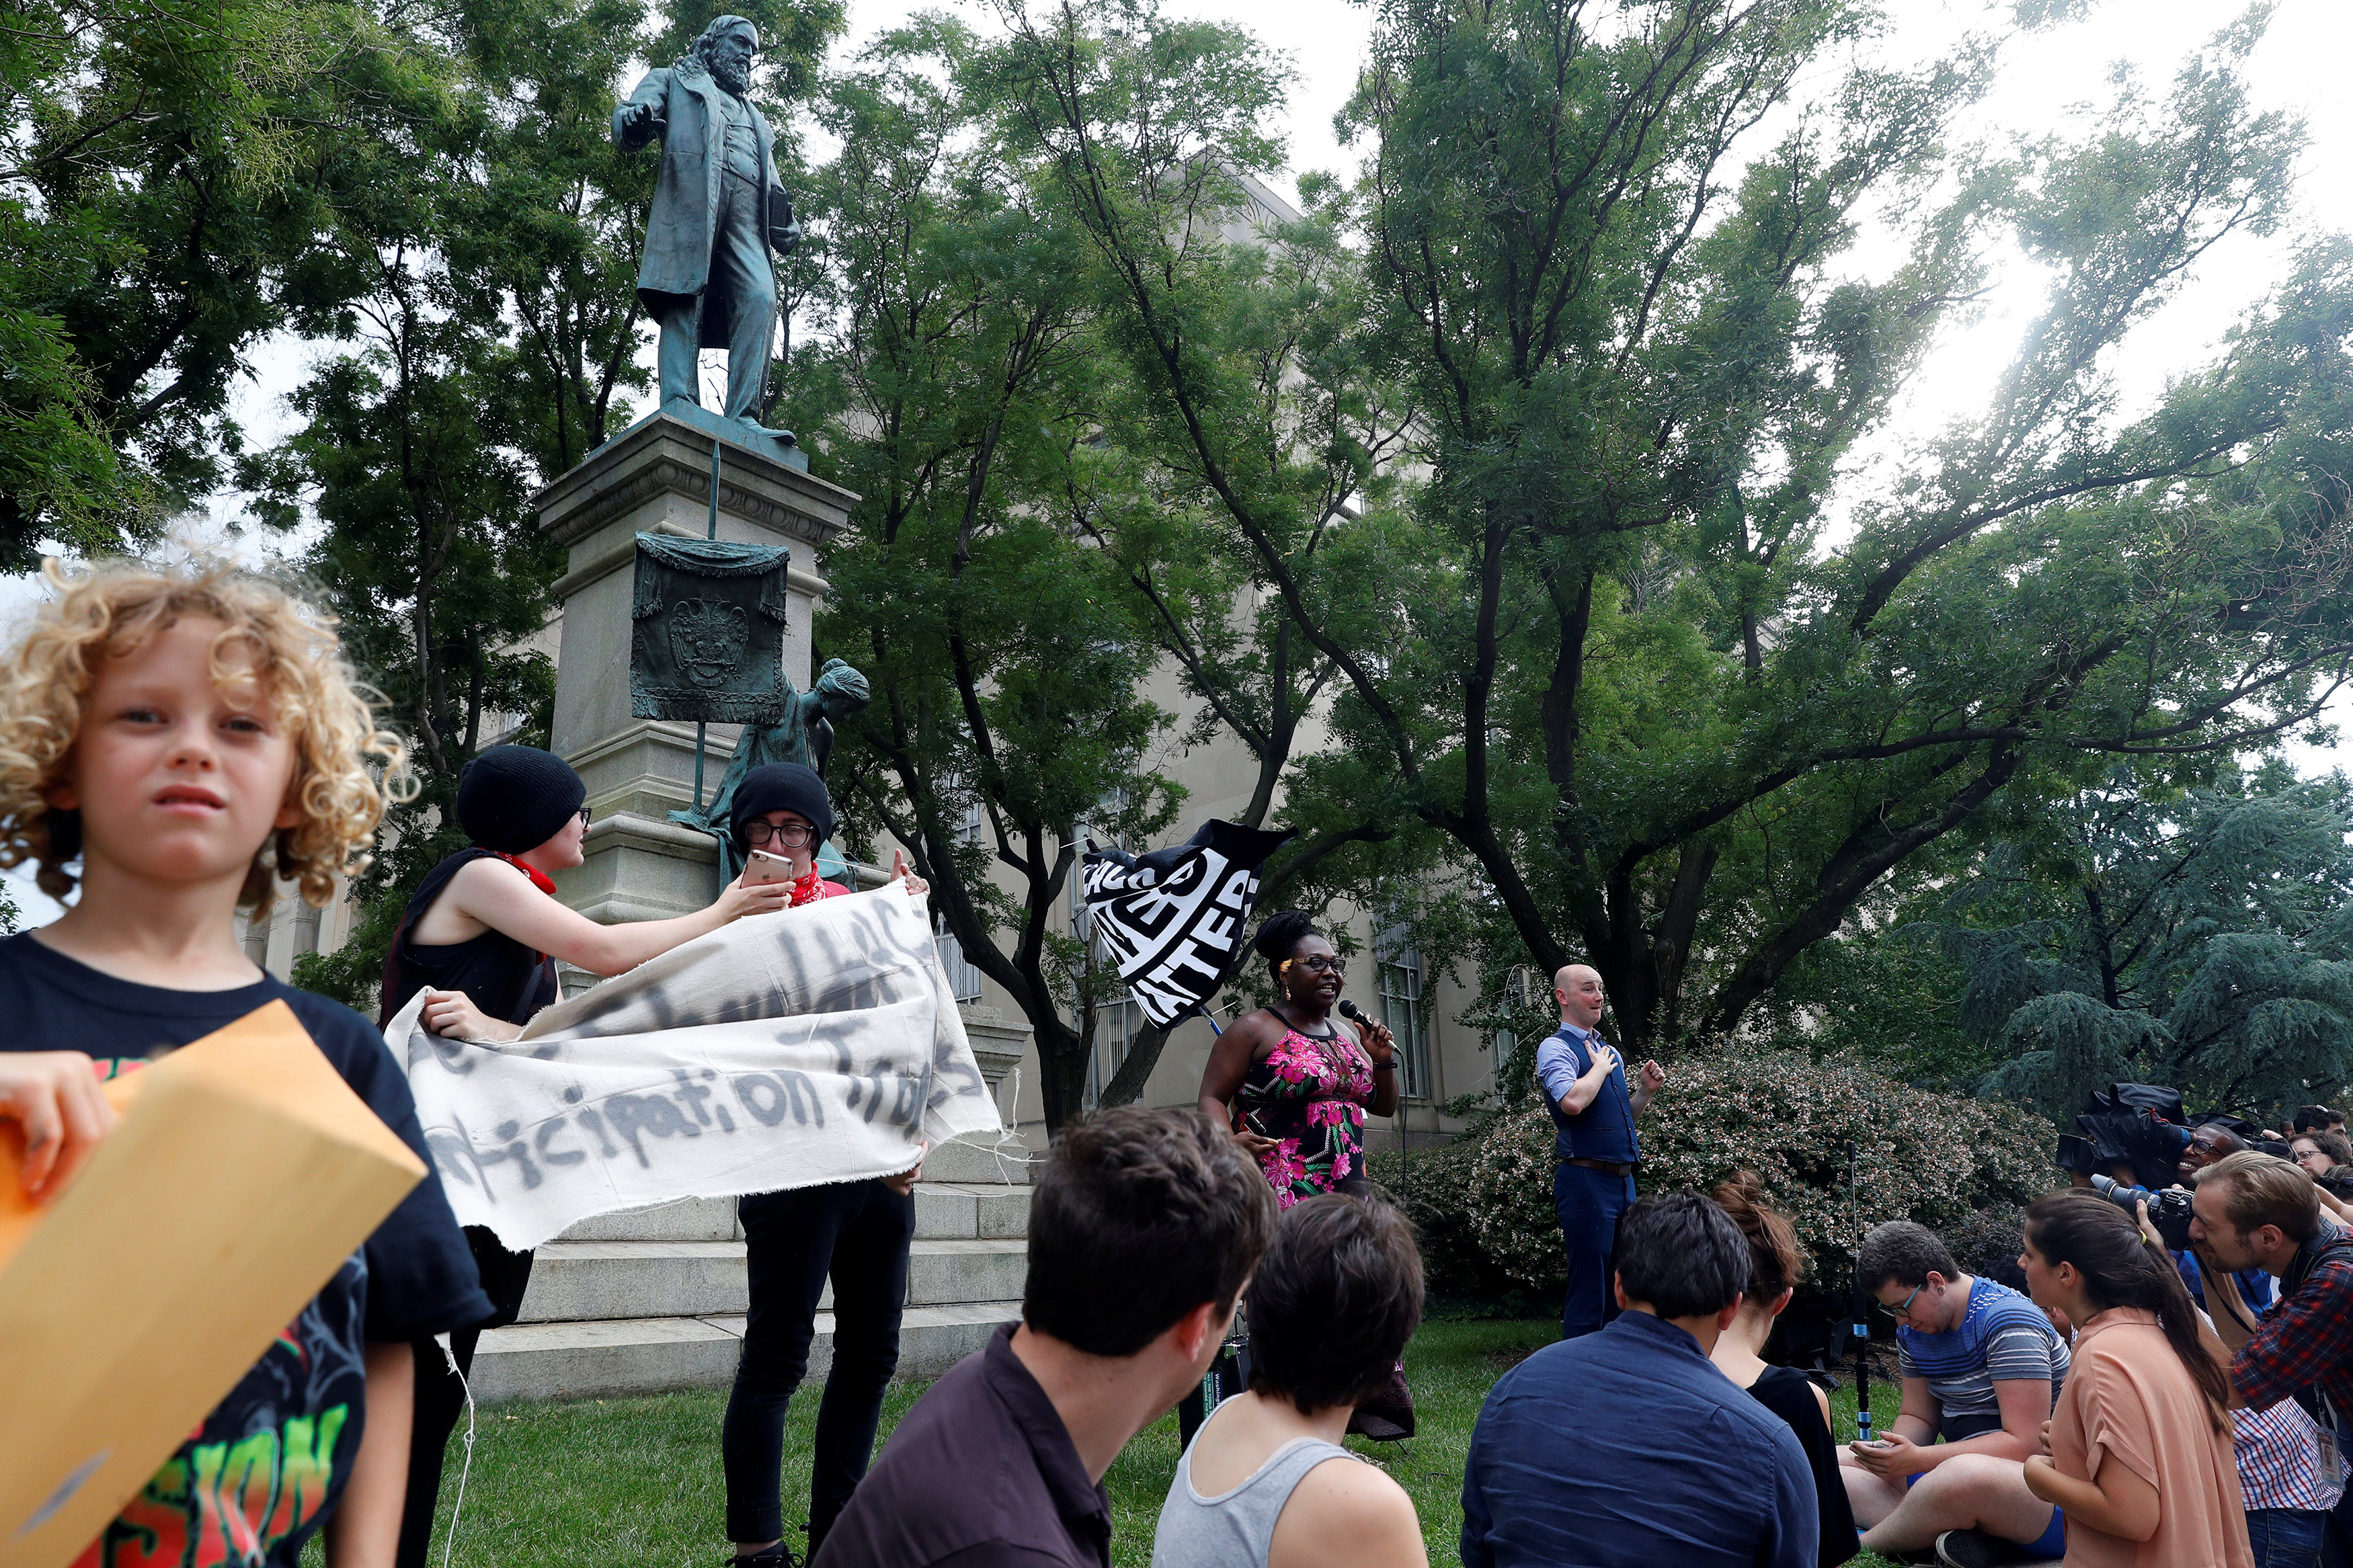 2017-08-18T234521Z_1850553360_RC15ED5A7370_RTRMADP_3_USA-PROTESTS-STATUES